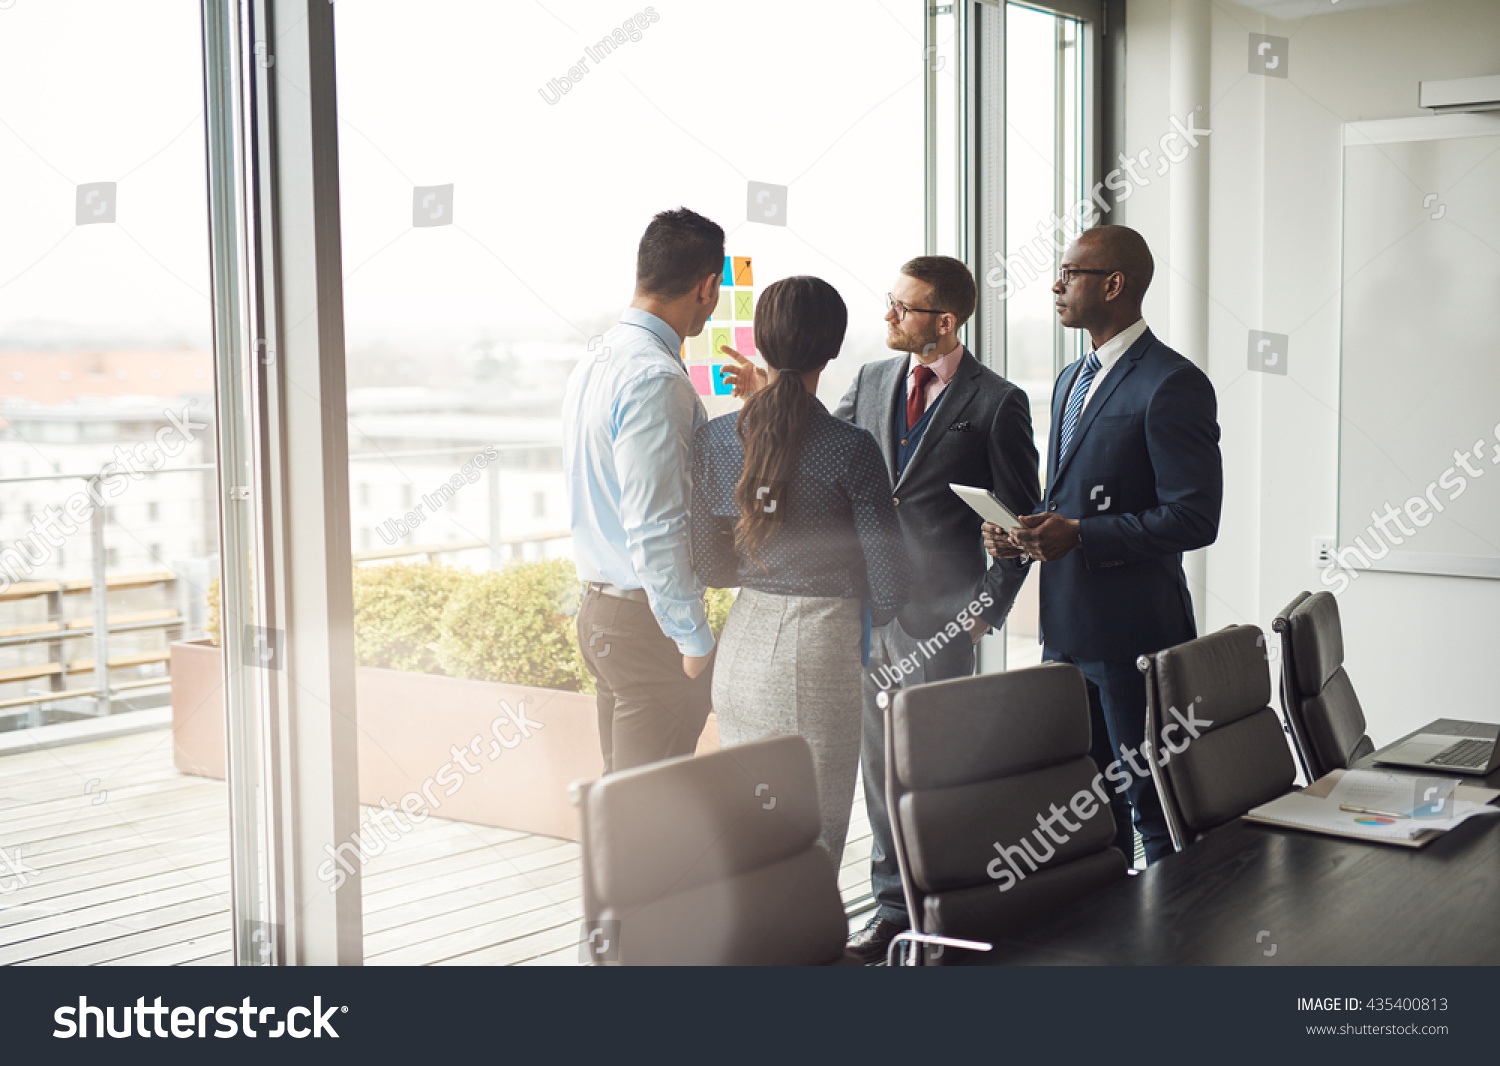 Diverse Multiracial Management Team Standing Grouped Stock Photo 435400813 - Shutterstock